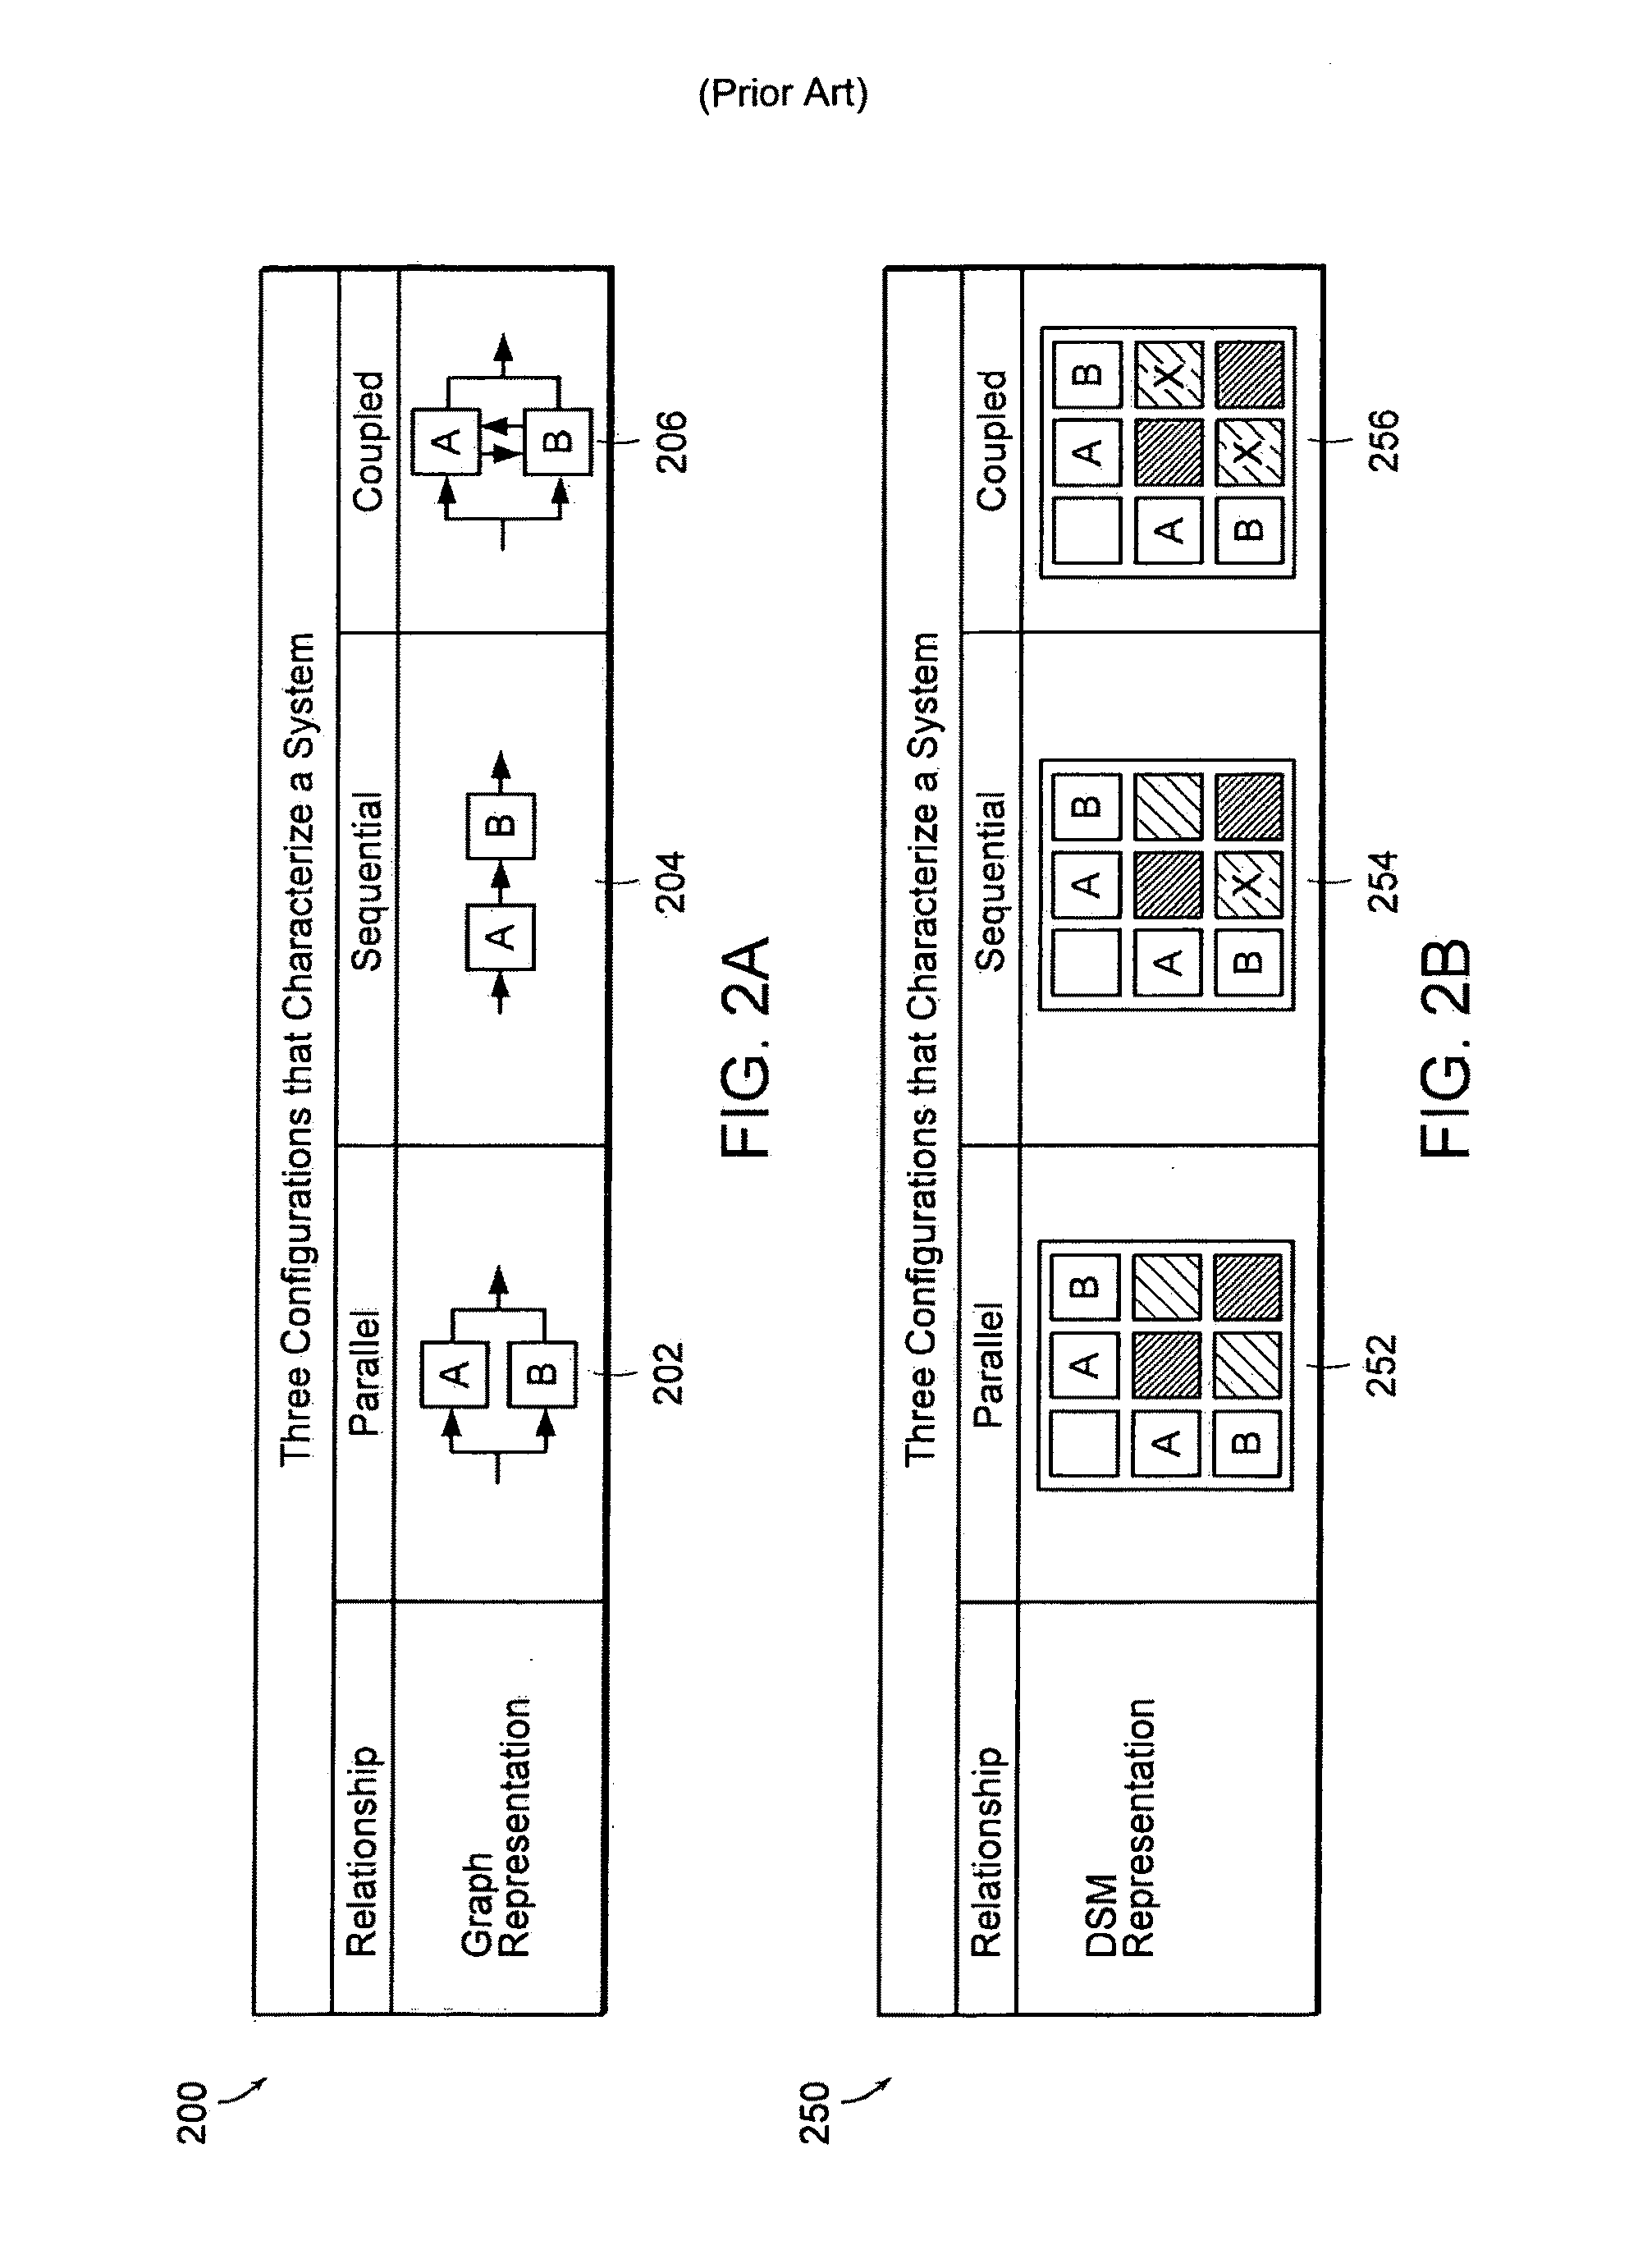 Apparatus and methods for displaying and determining dependency relationships among subsystems in a computer software system